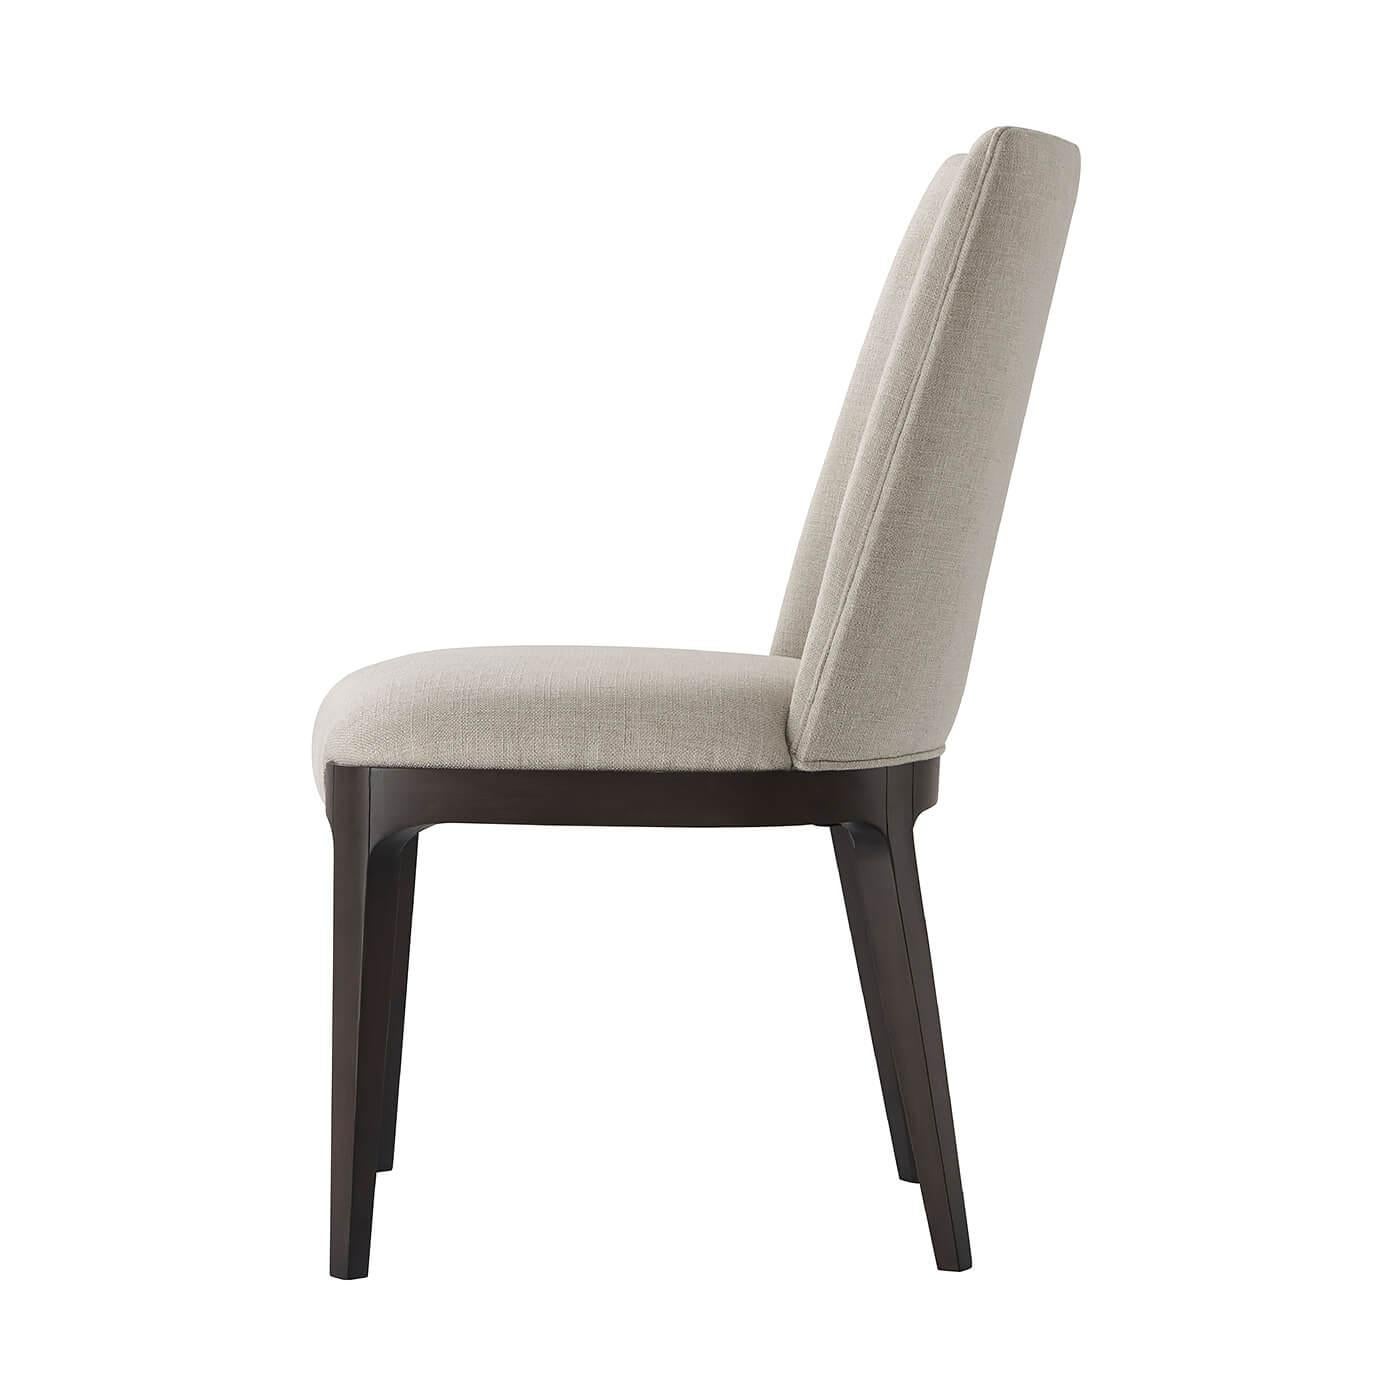 Modern upholstered dining side chair with solid beech and a dark Macadamia finish. With a scoop barrel back and tightly upholstered seat cushion on clamped tapering legs.

Dimensions:
20.25